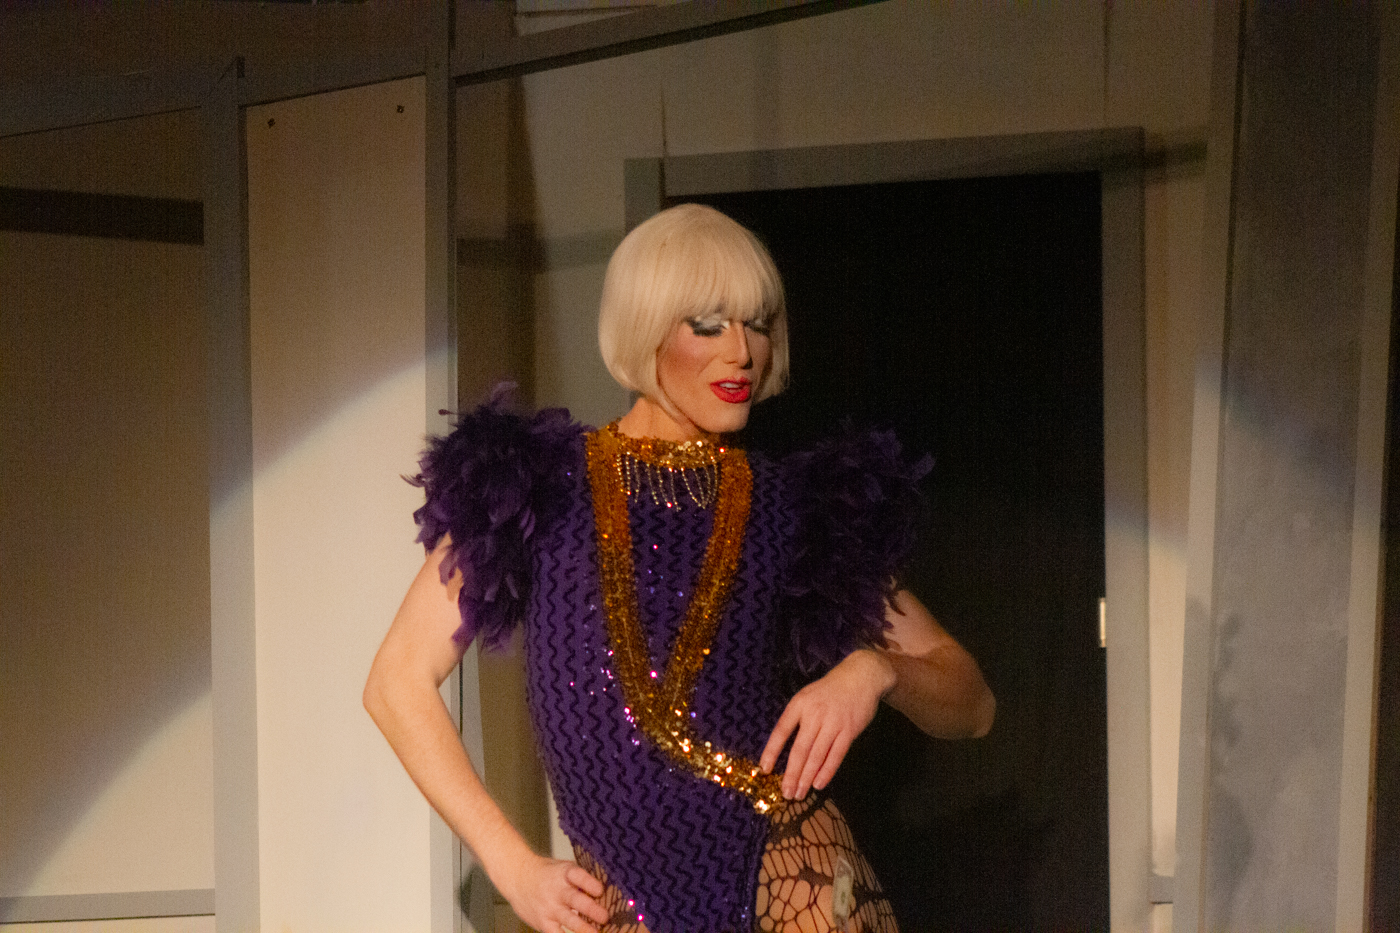 Dee Lightful Masters performs to Lady Gagas Paparazzi at the annual drag brunch event at Roxys Downtown on Nov. 12.